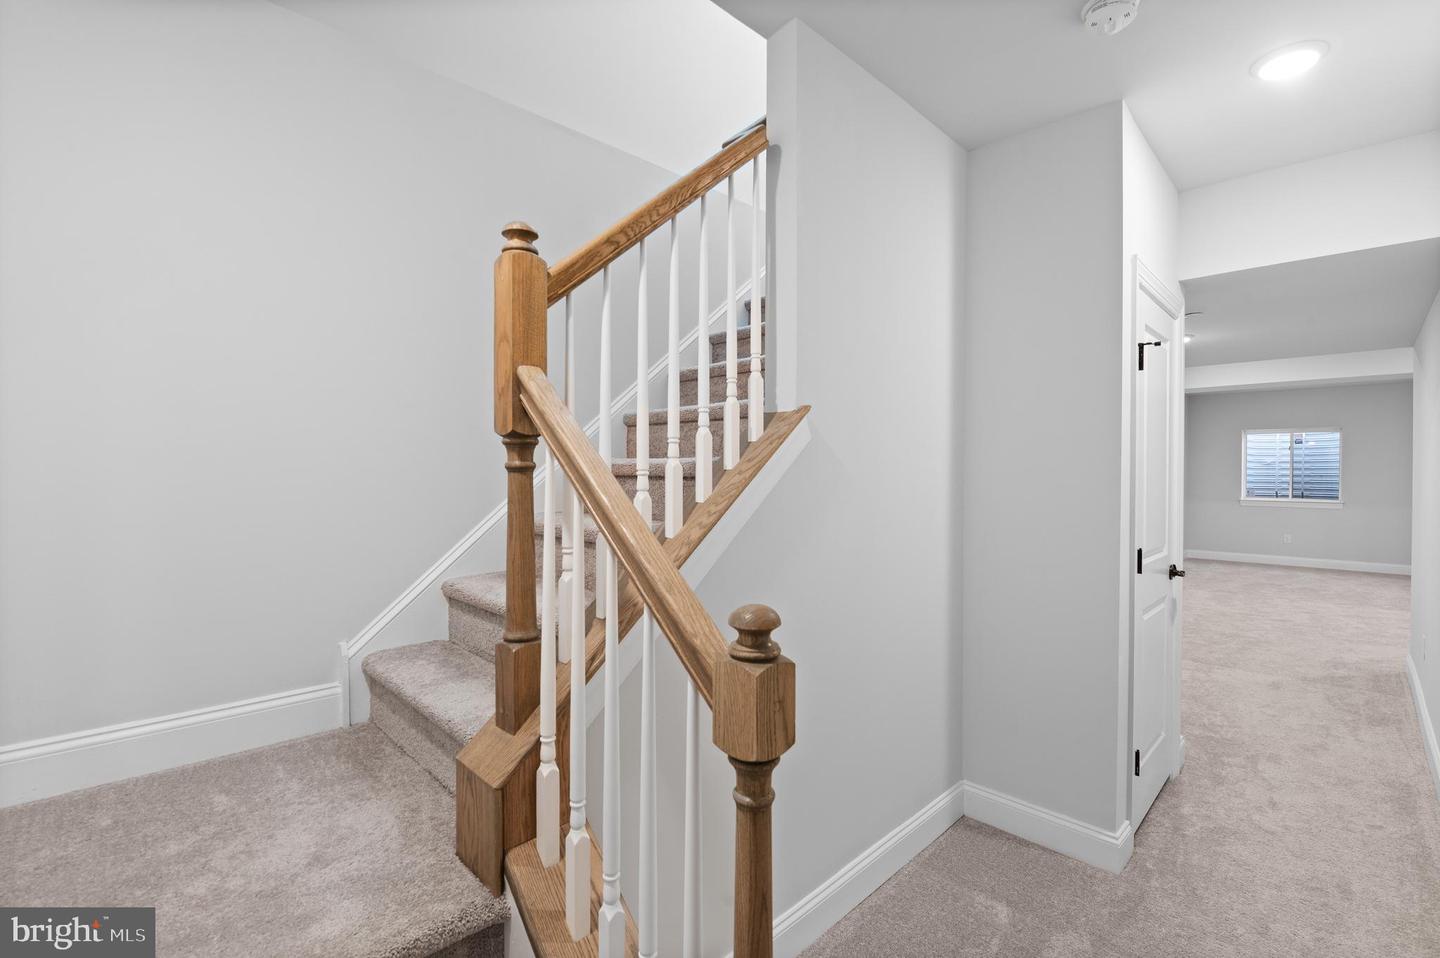 Photo 28 of 34 of 205 Arch Way #Lot #13 townhome